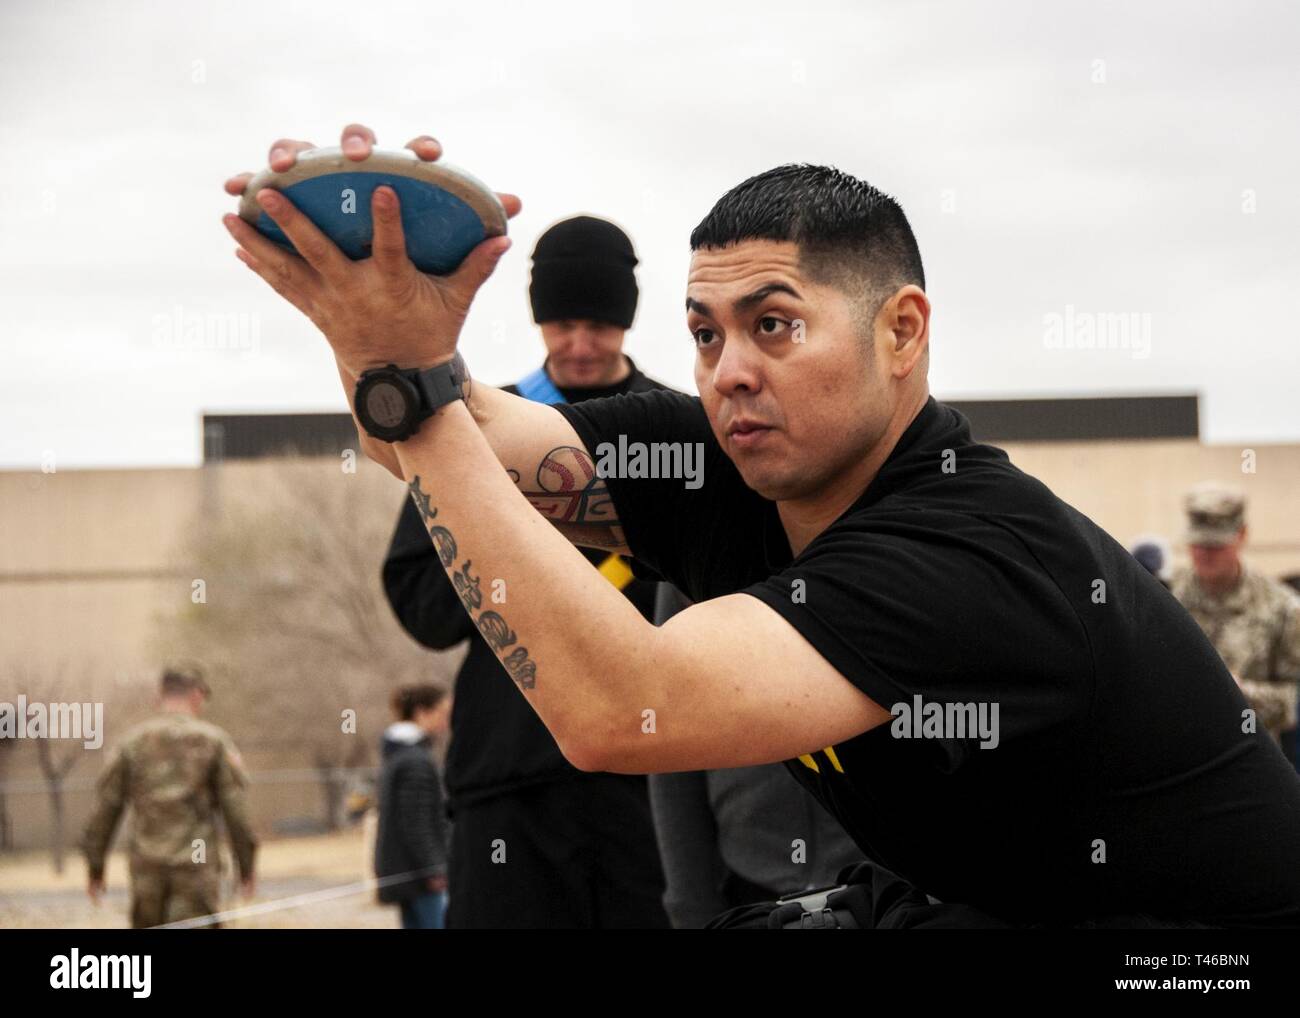 Sgt. Christopher Campos prepares for a discus throw during the field competition at the 2019 Army Trials, at Fort Bliss, Texas, March 11. Army Trials is an adaptive-sports competition taking place from March 5 - 16 with nearly 100 wounded, ill and injured active-duty Soldiers and veterans competing in 14 different adaptive sports for the opportunity to represent Team Army at the 2019 Department of Defense Warrior Games in Tampa, Florida. Stock Photo